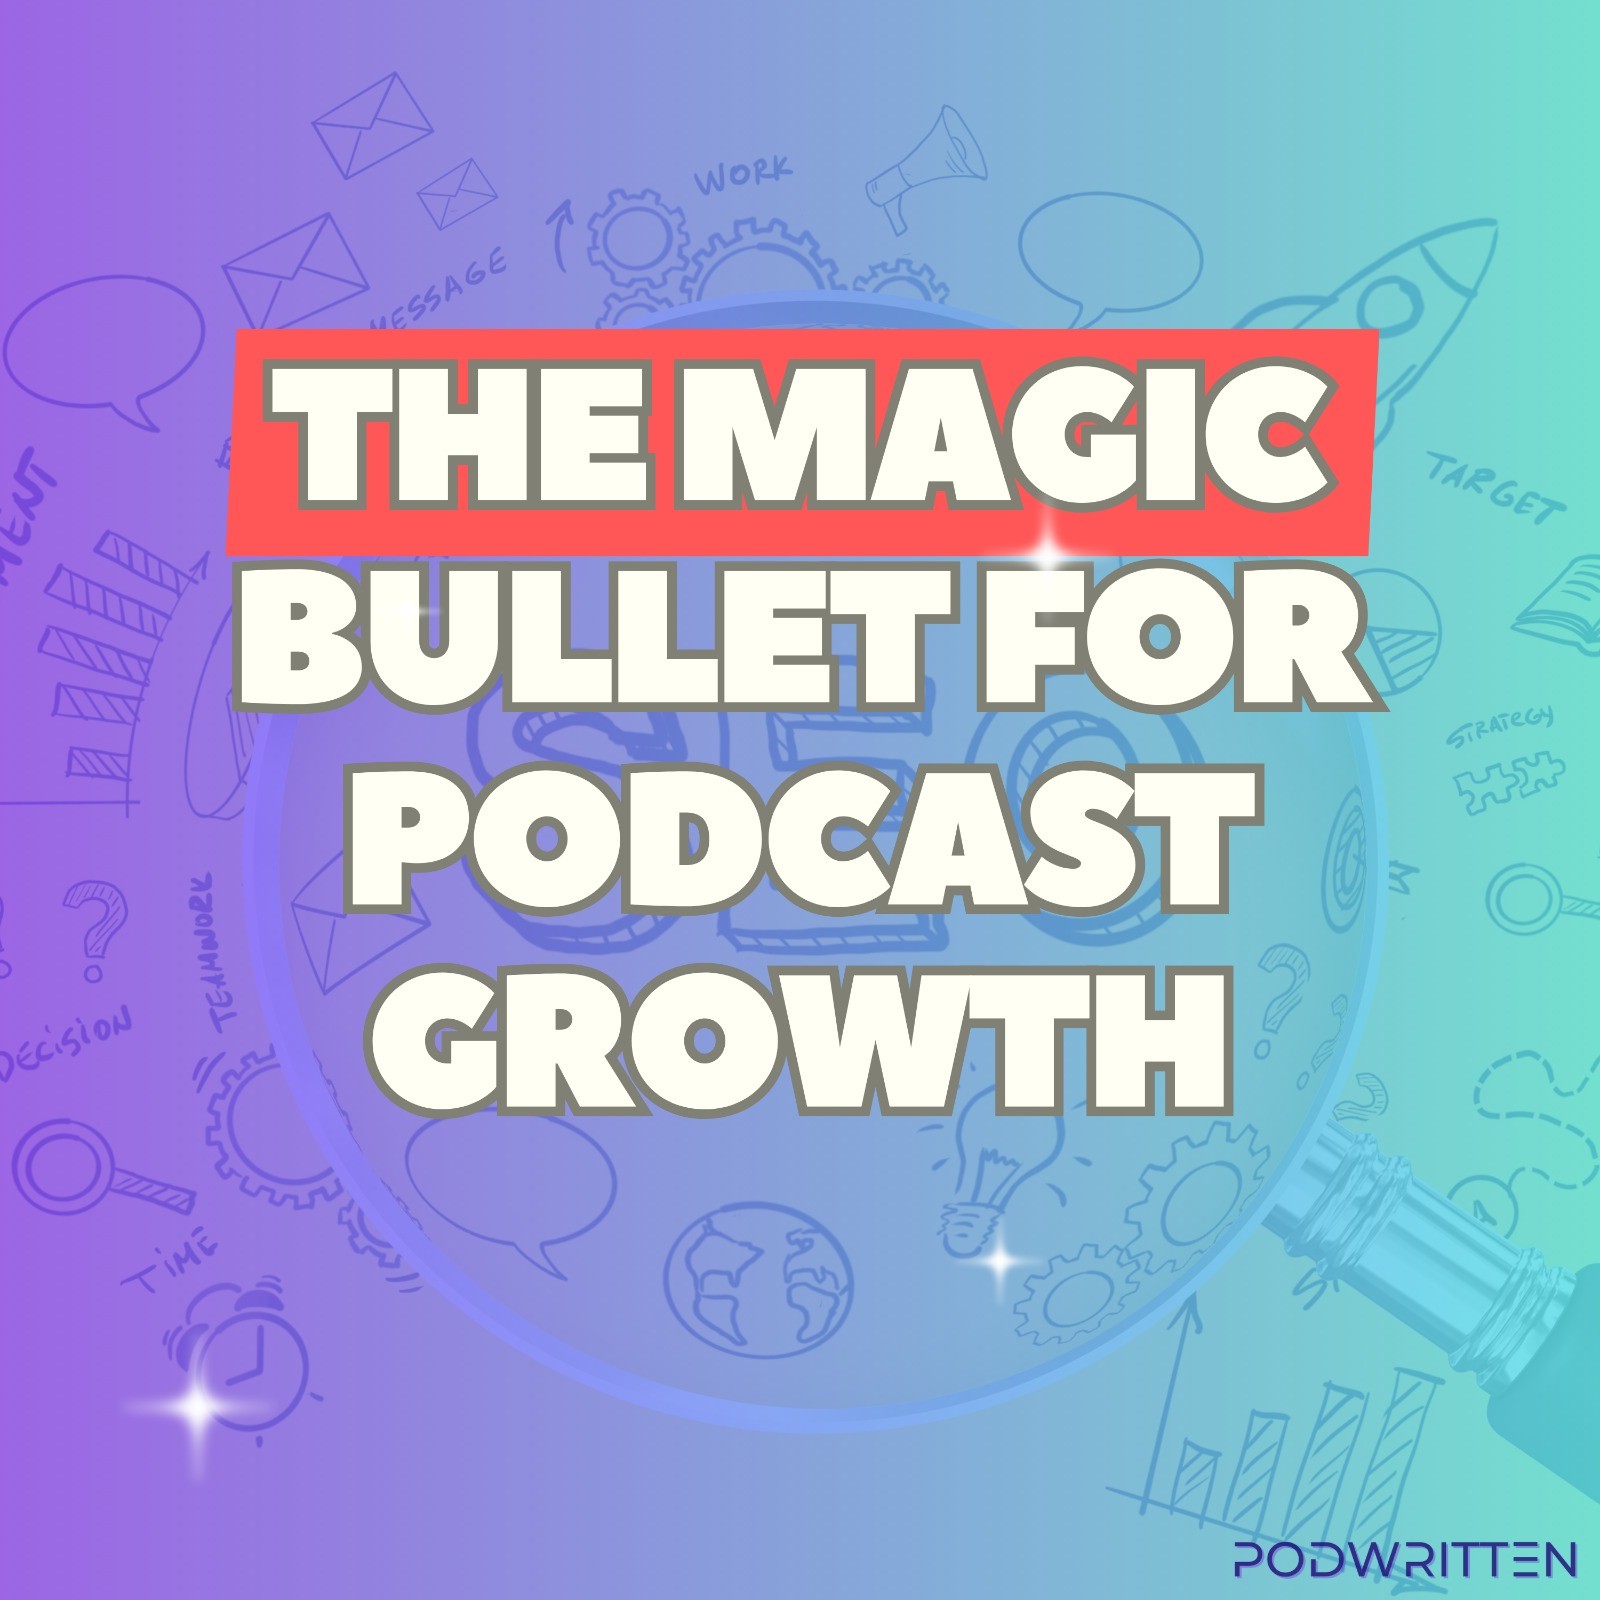 Using SEO for fast podcast growth with Michele Riechman